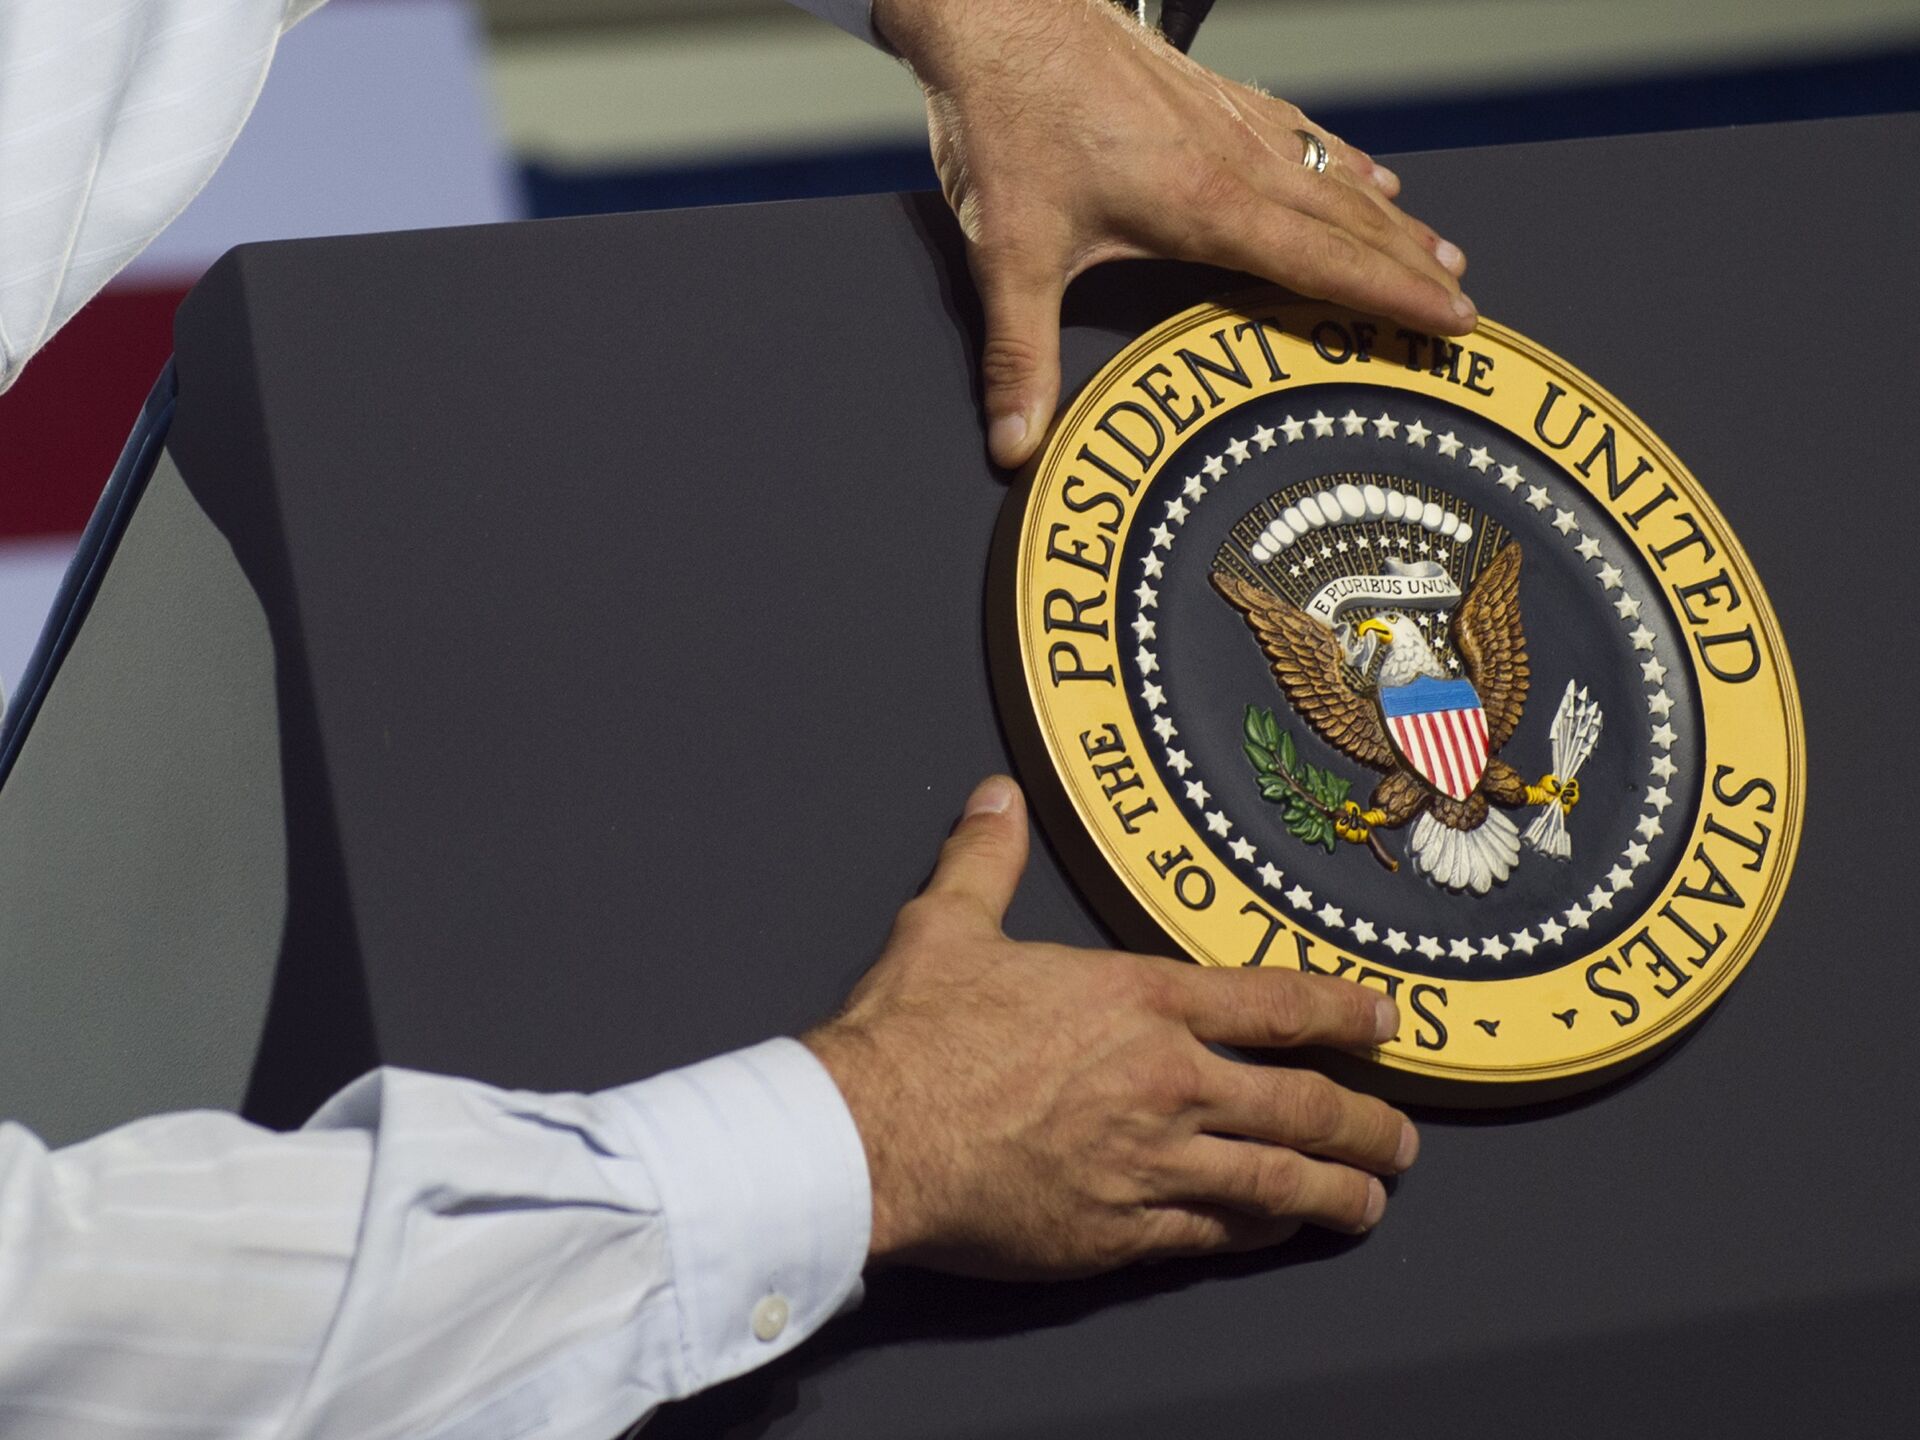 Presidential Seal at His Golf Course